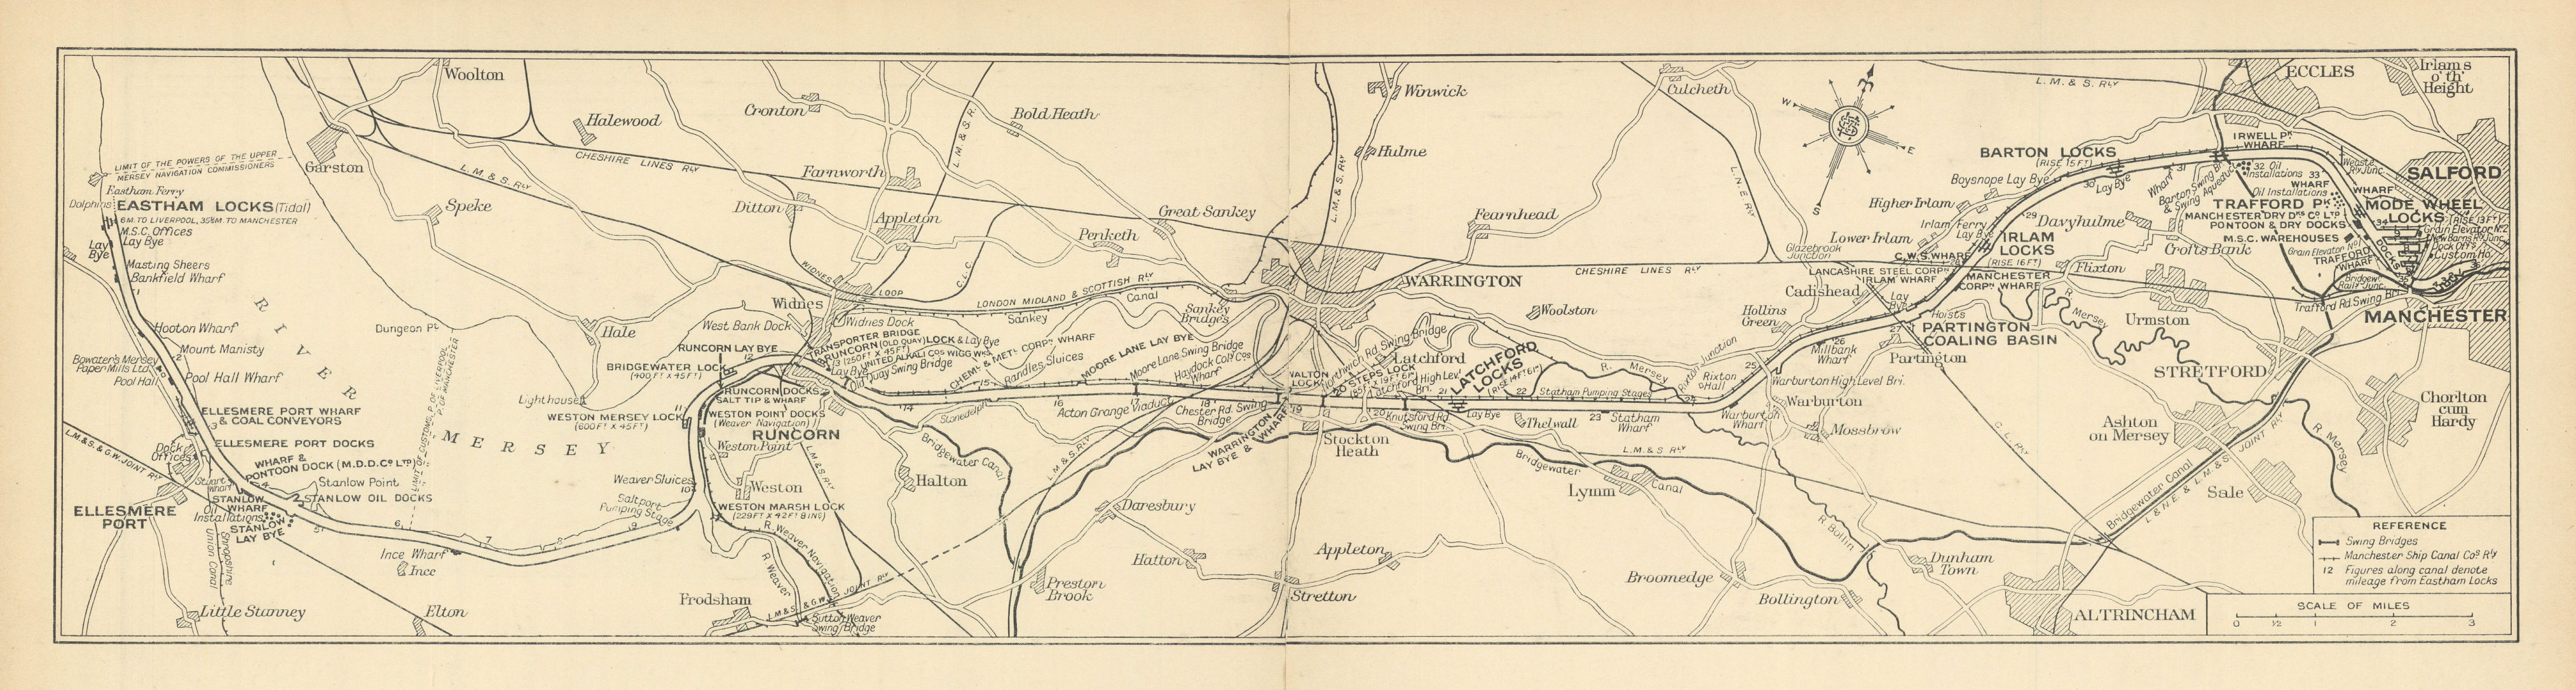 Associate Product Manchester Ship Canal. Mersey - Runcorn - Warrington. GEOGRAPHIA 1935 old map